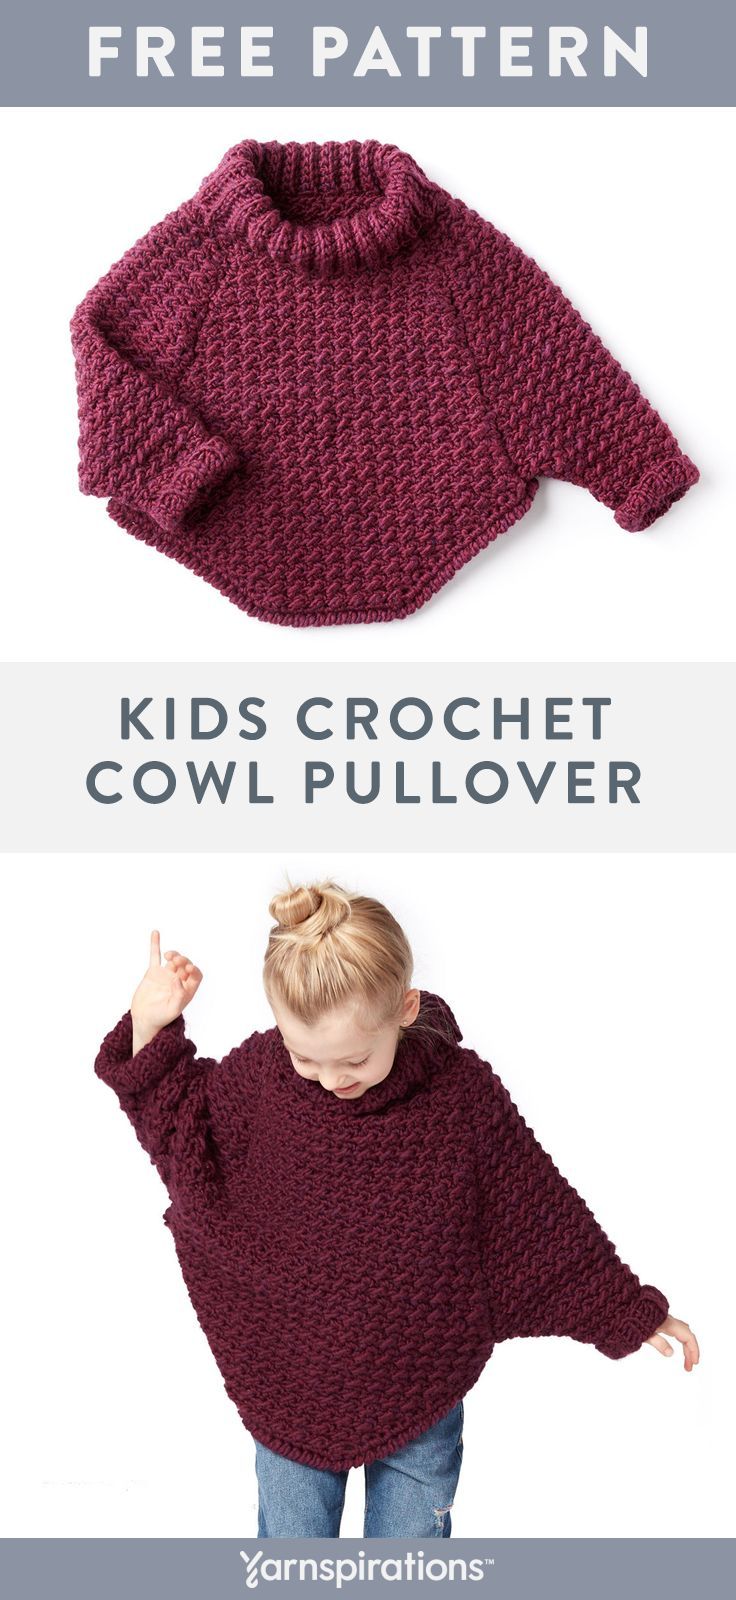 Free Girl's Crochet Pullover Pattern | This beginner friendly crochet pullover is a perfect layering piece for your little one! Working a simple crochet stitch and some basic shaping this sweater is great for beginners. Crocheted in super soft Bernat Roving, this easy to care for yarn makes this sweater a staple for winter. #yarnspirations #bernatroving #kidscrochetpatterns #crochet #freecrochetpatterns